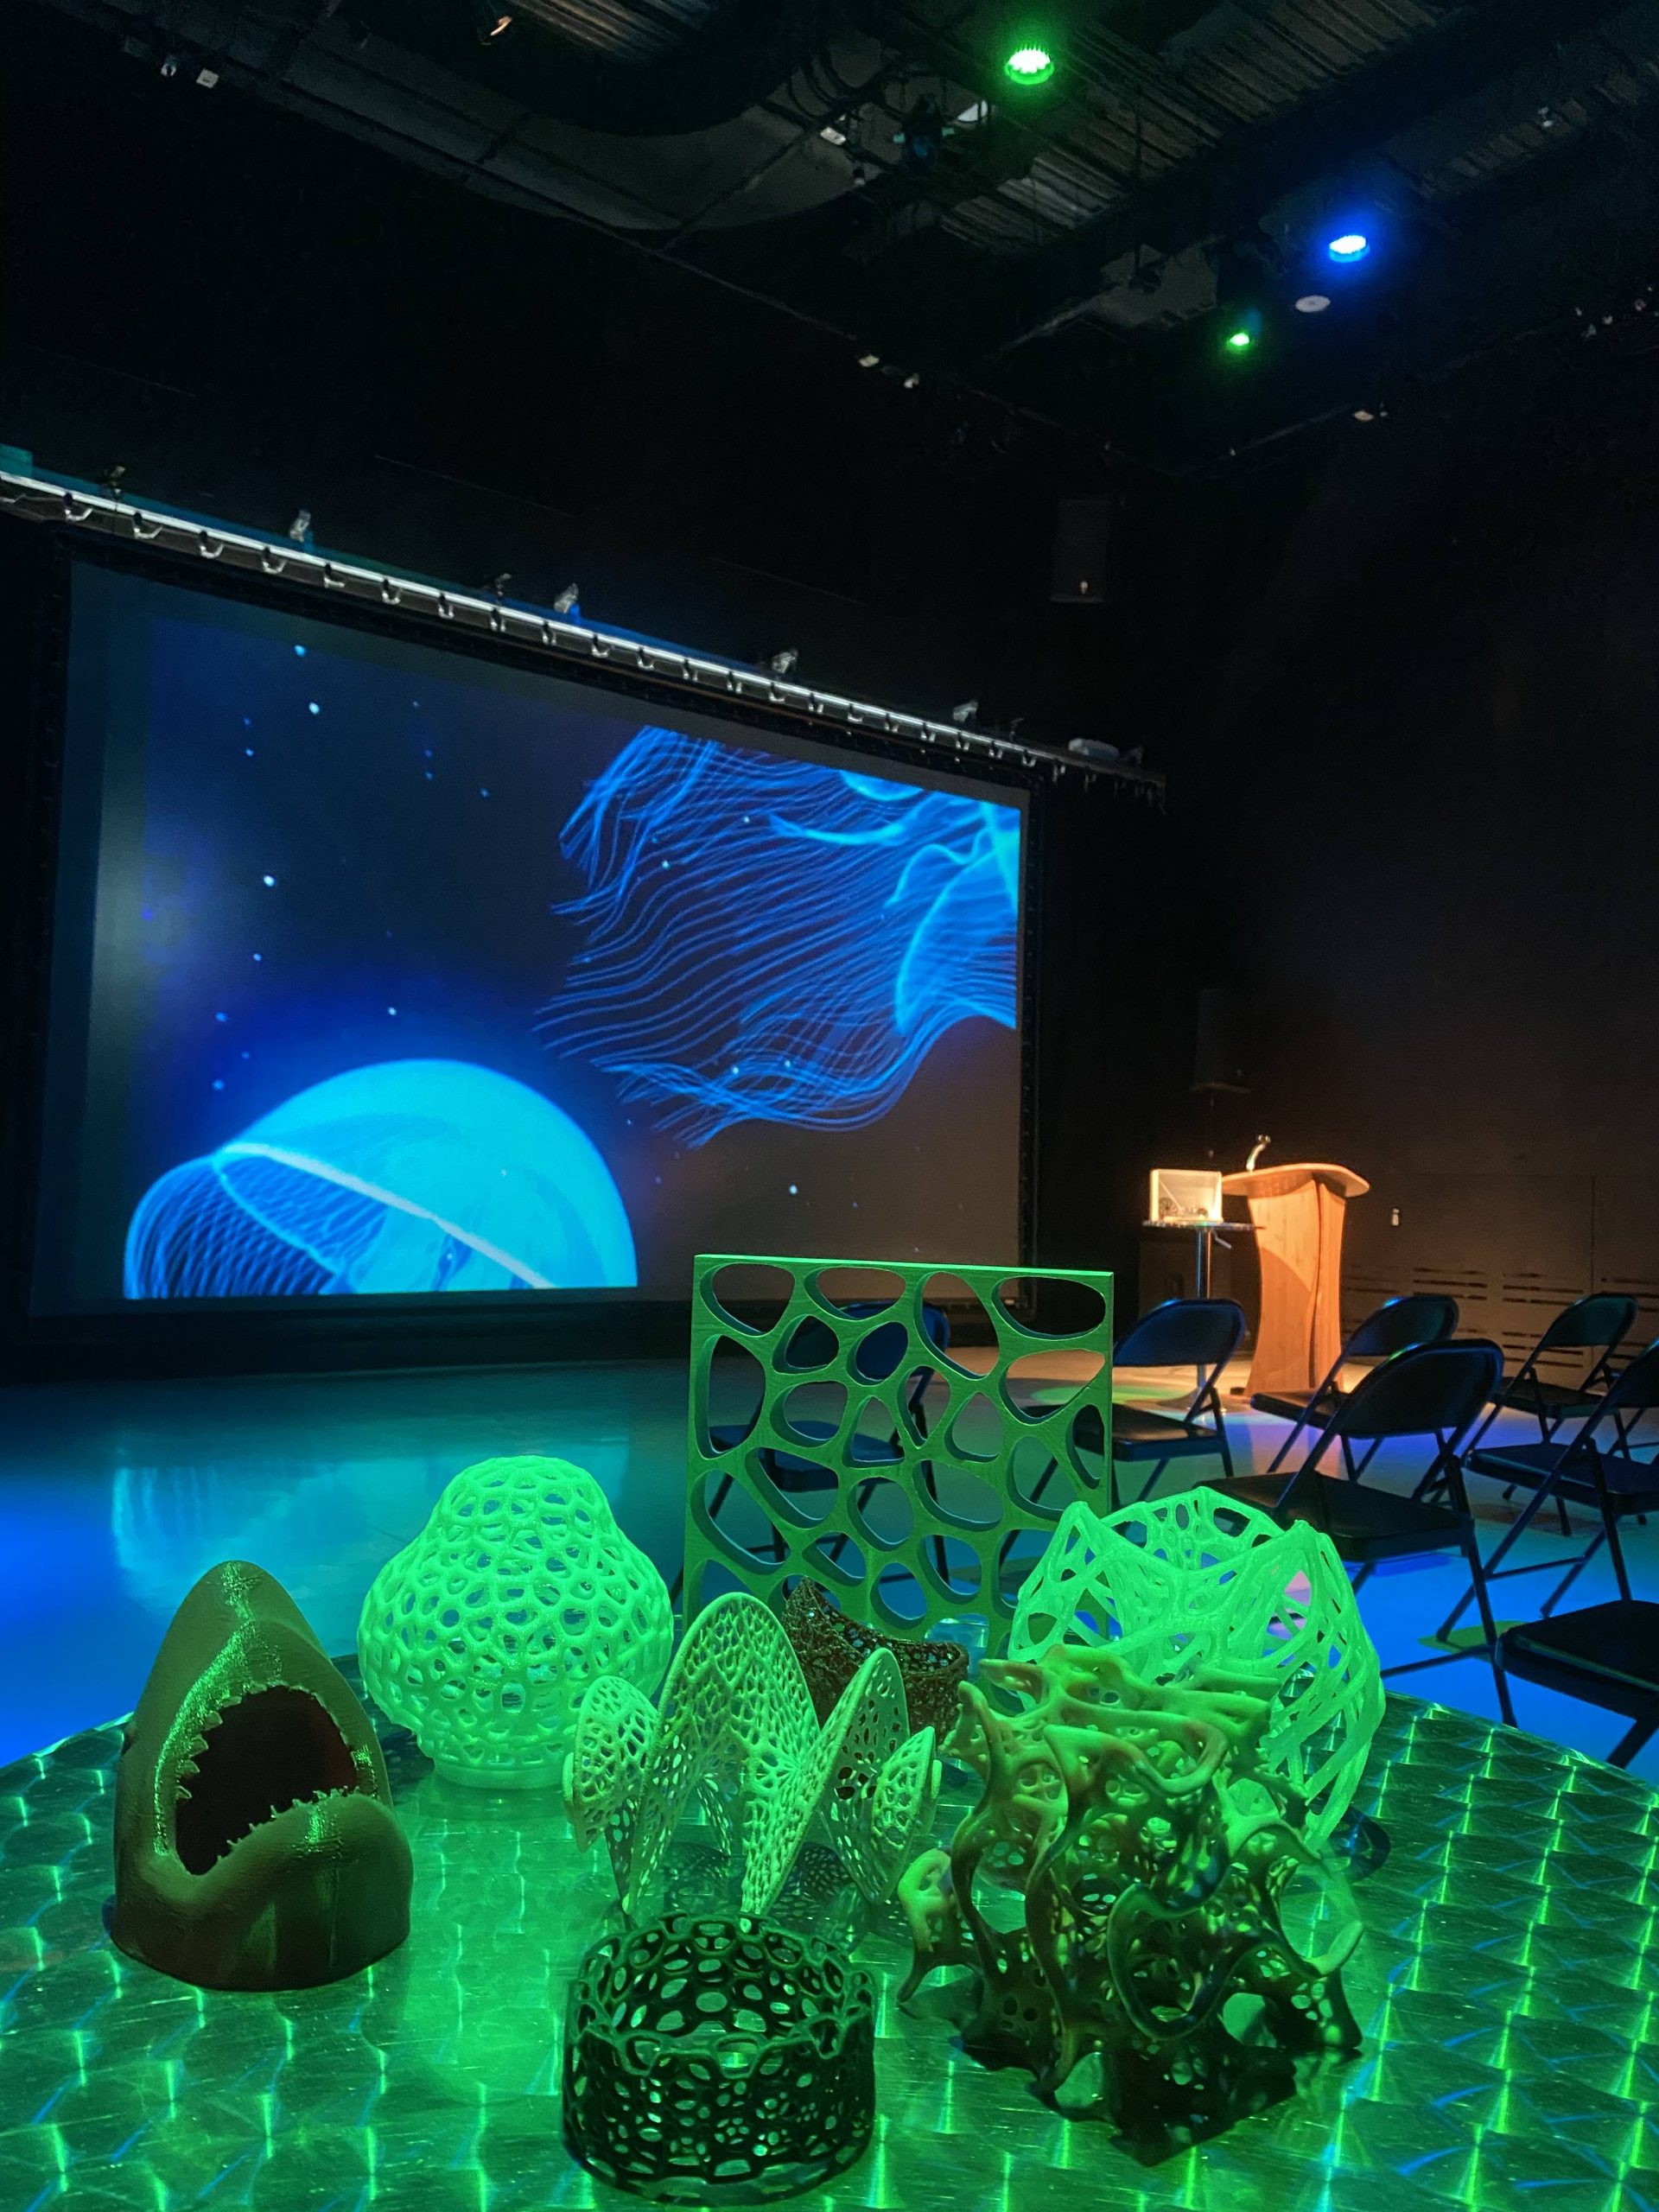 Green and blue theater lights shine on 3D printed objects in the IMRC Center's Adaptive Presentation and Performance Environment. A jellyfish swims on the projection screen.